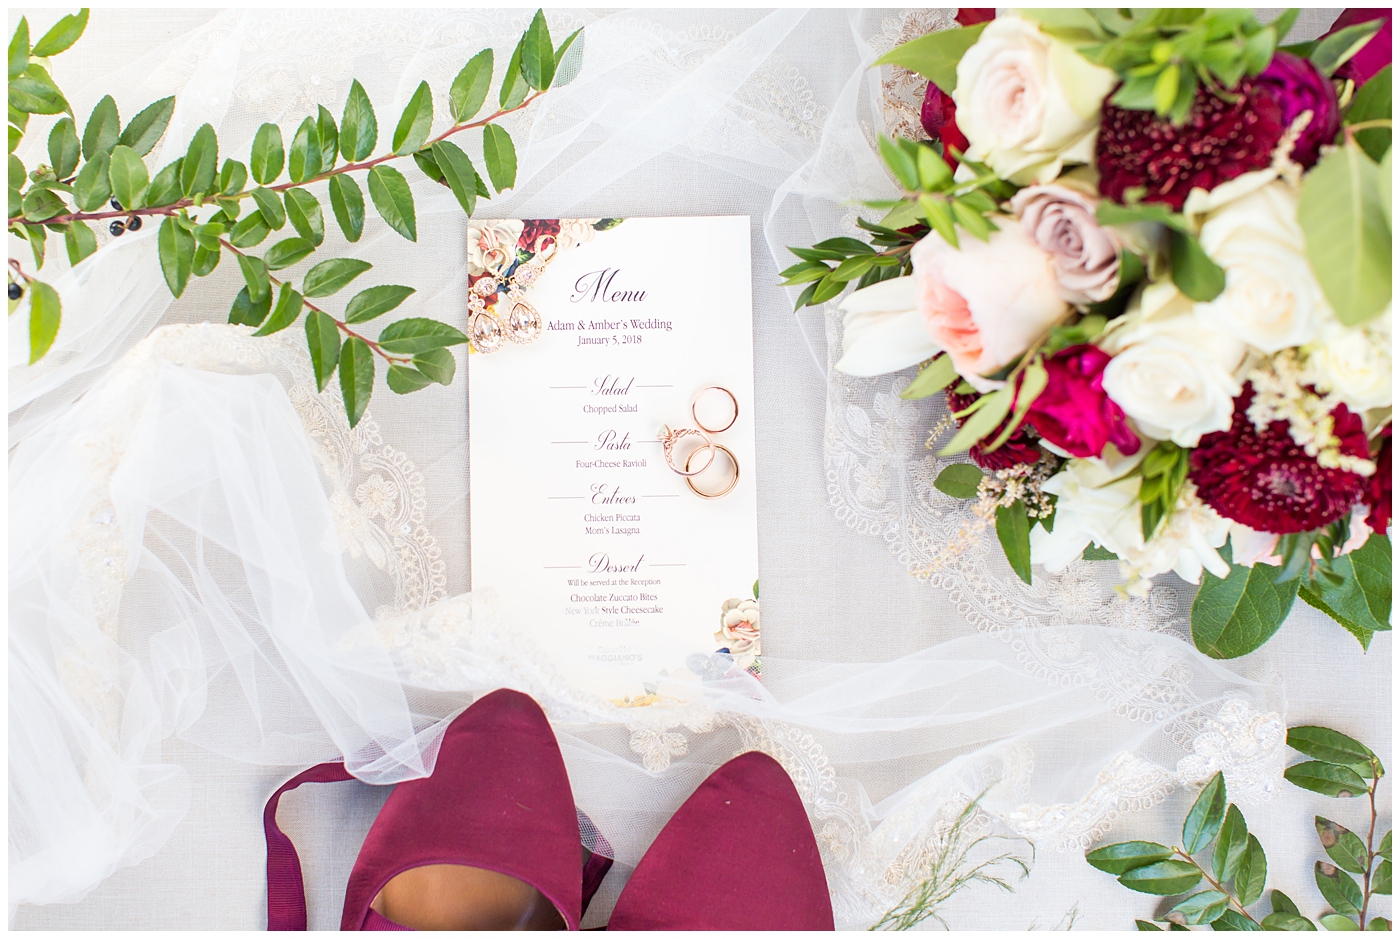 wedding invite with burgundy florals with rose gold wedding rings and bands with bride's burgundy tie up ballet flats wedding day details